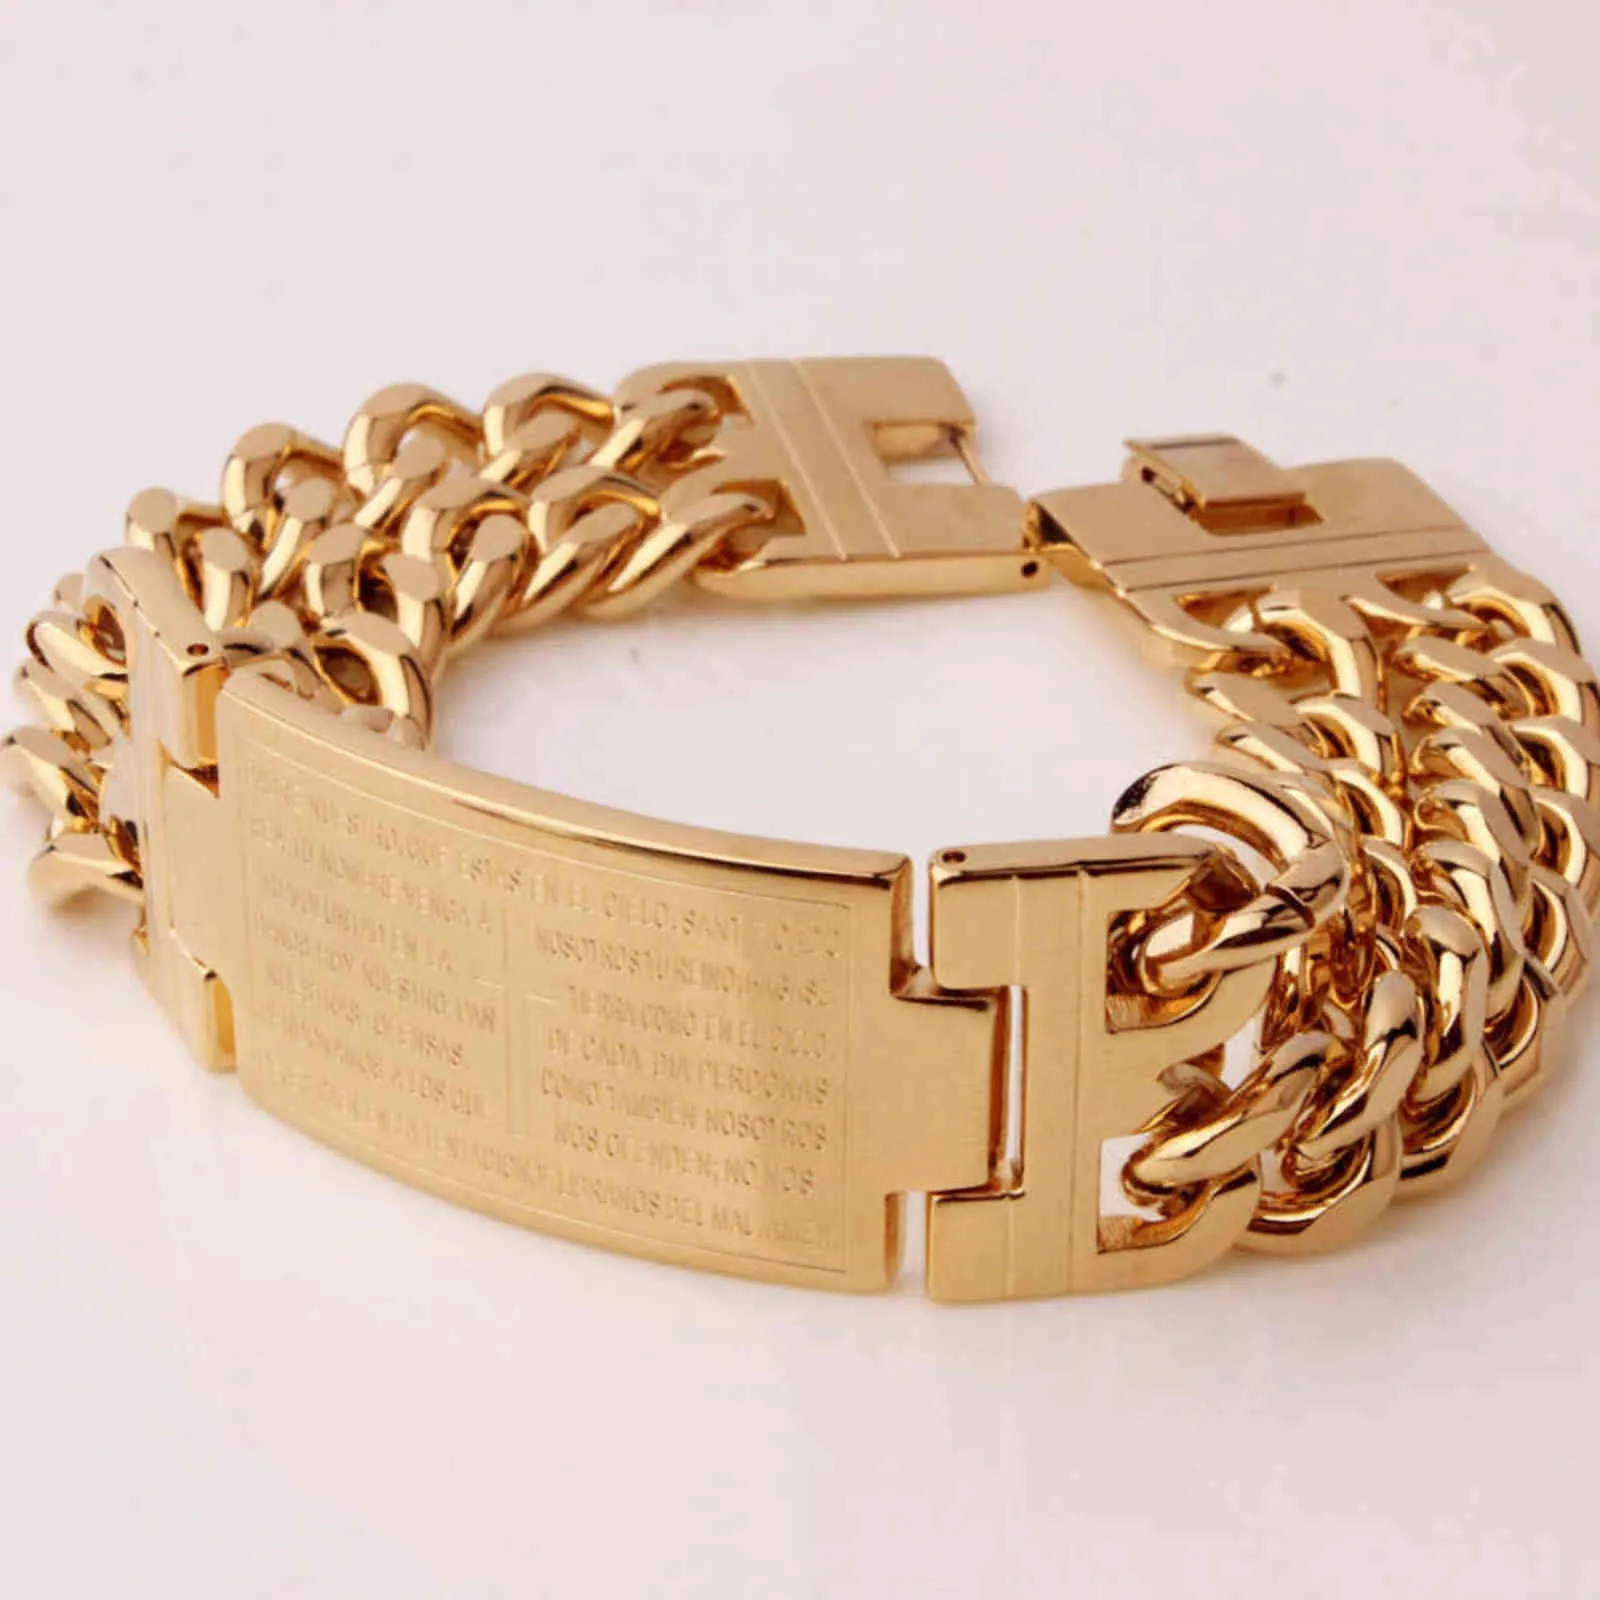 Men's Religious Gold Pure Stainless Steel Spanish Bible Cross Id Double Row Chain Bracelet 23mm 9" Quality